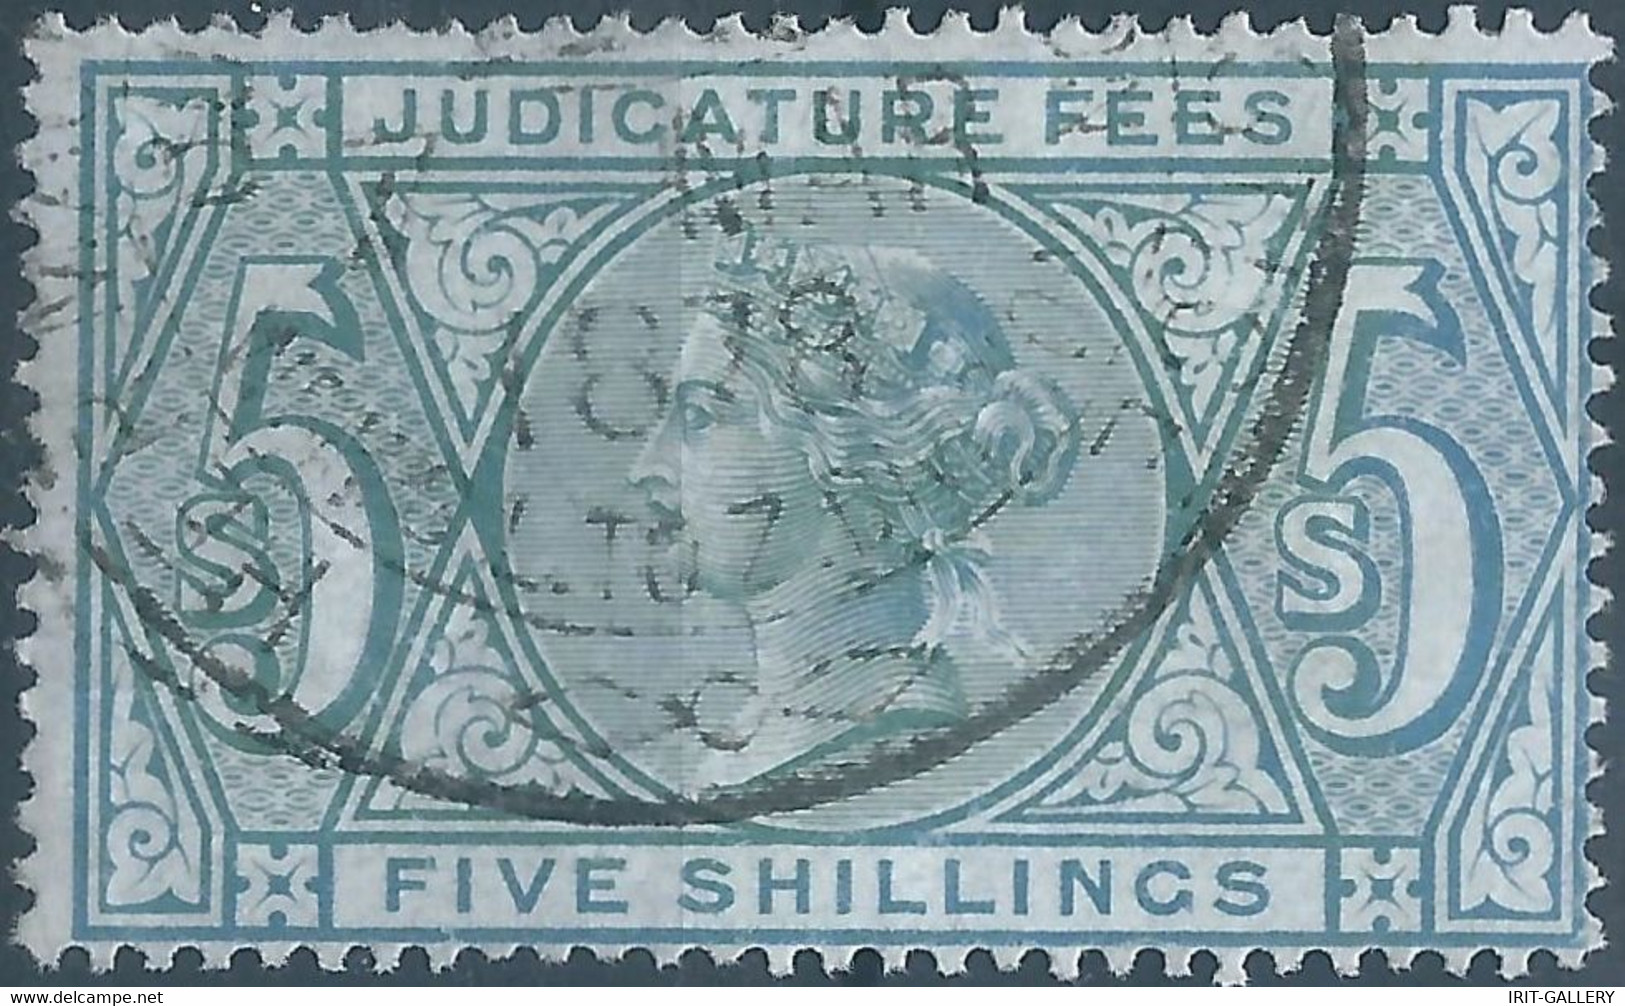 Great Britain-ENGLAND,Queen Victoria,1880-1900 Revenue Stamp Tax Fiscal,JUDICATURE FEES, 5 Shillings,Used - Fiscali